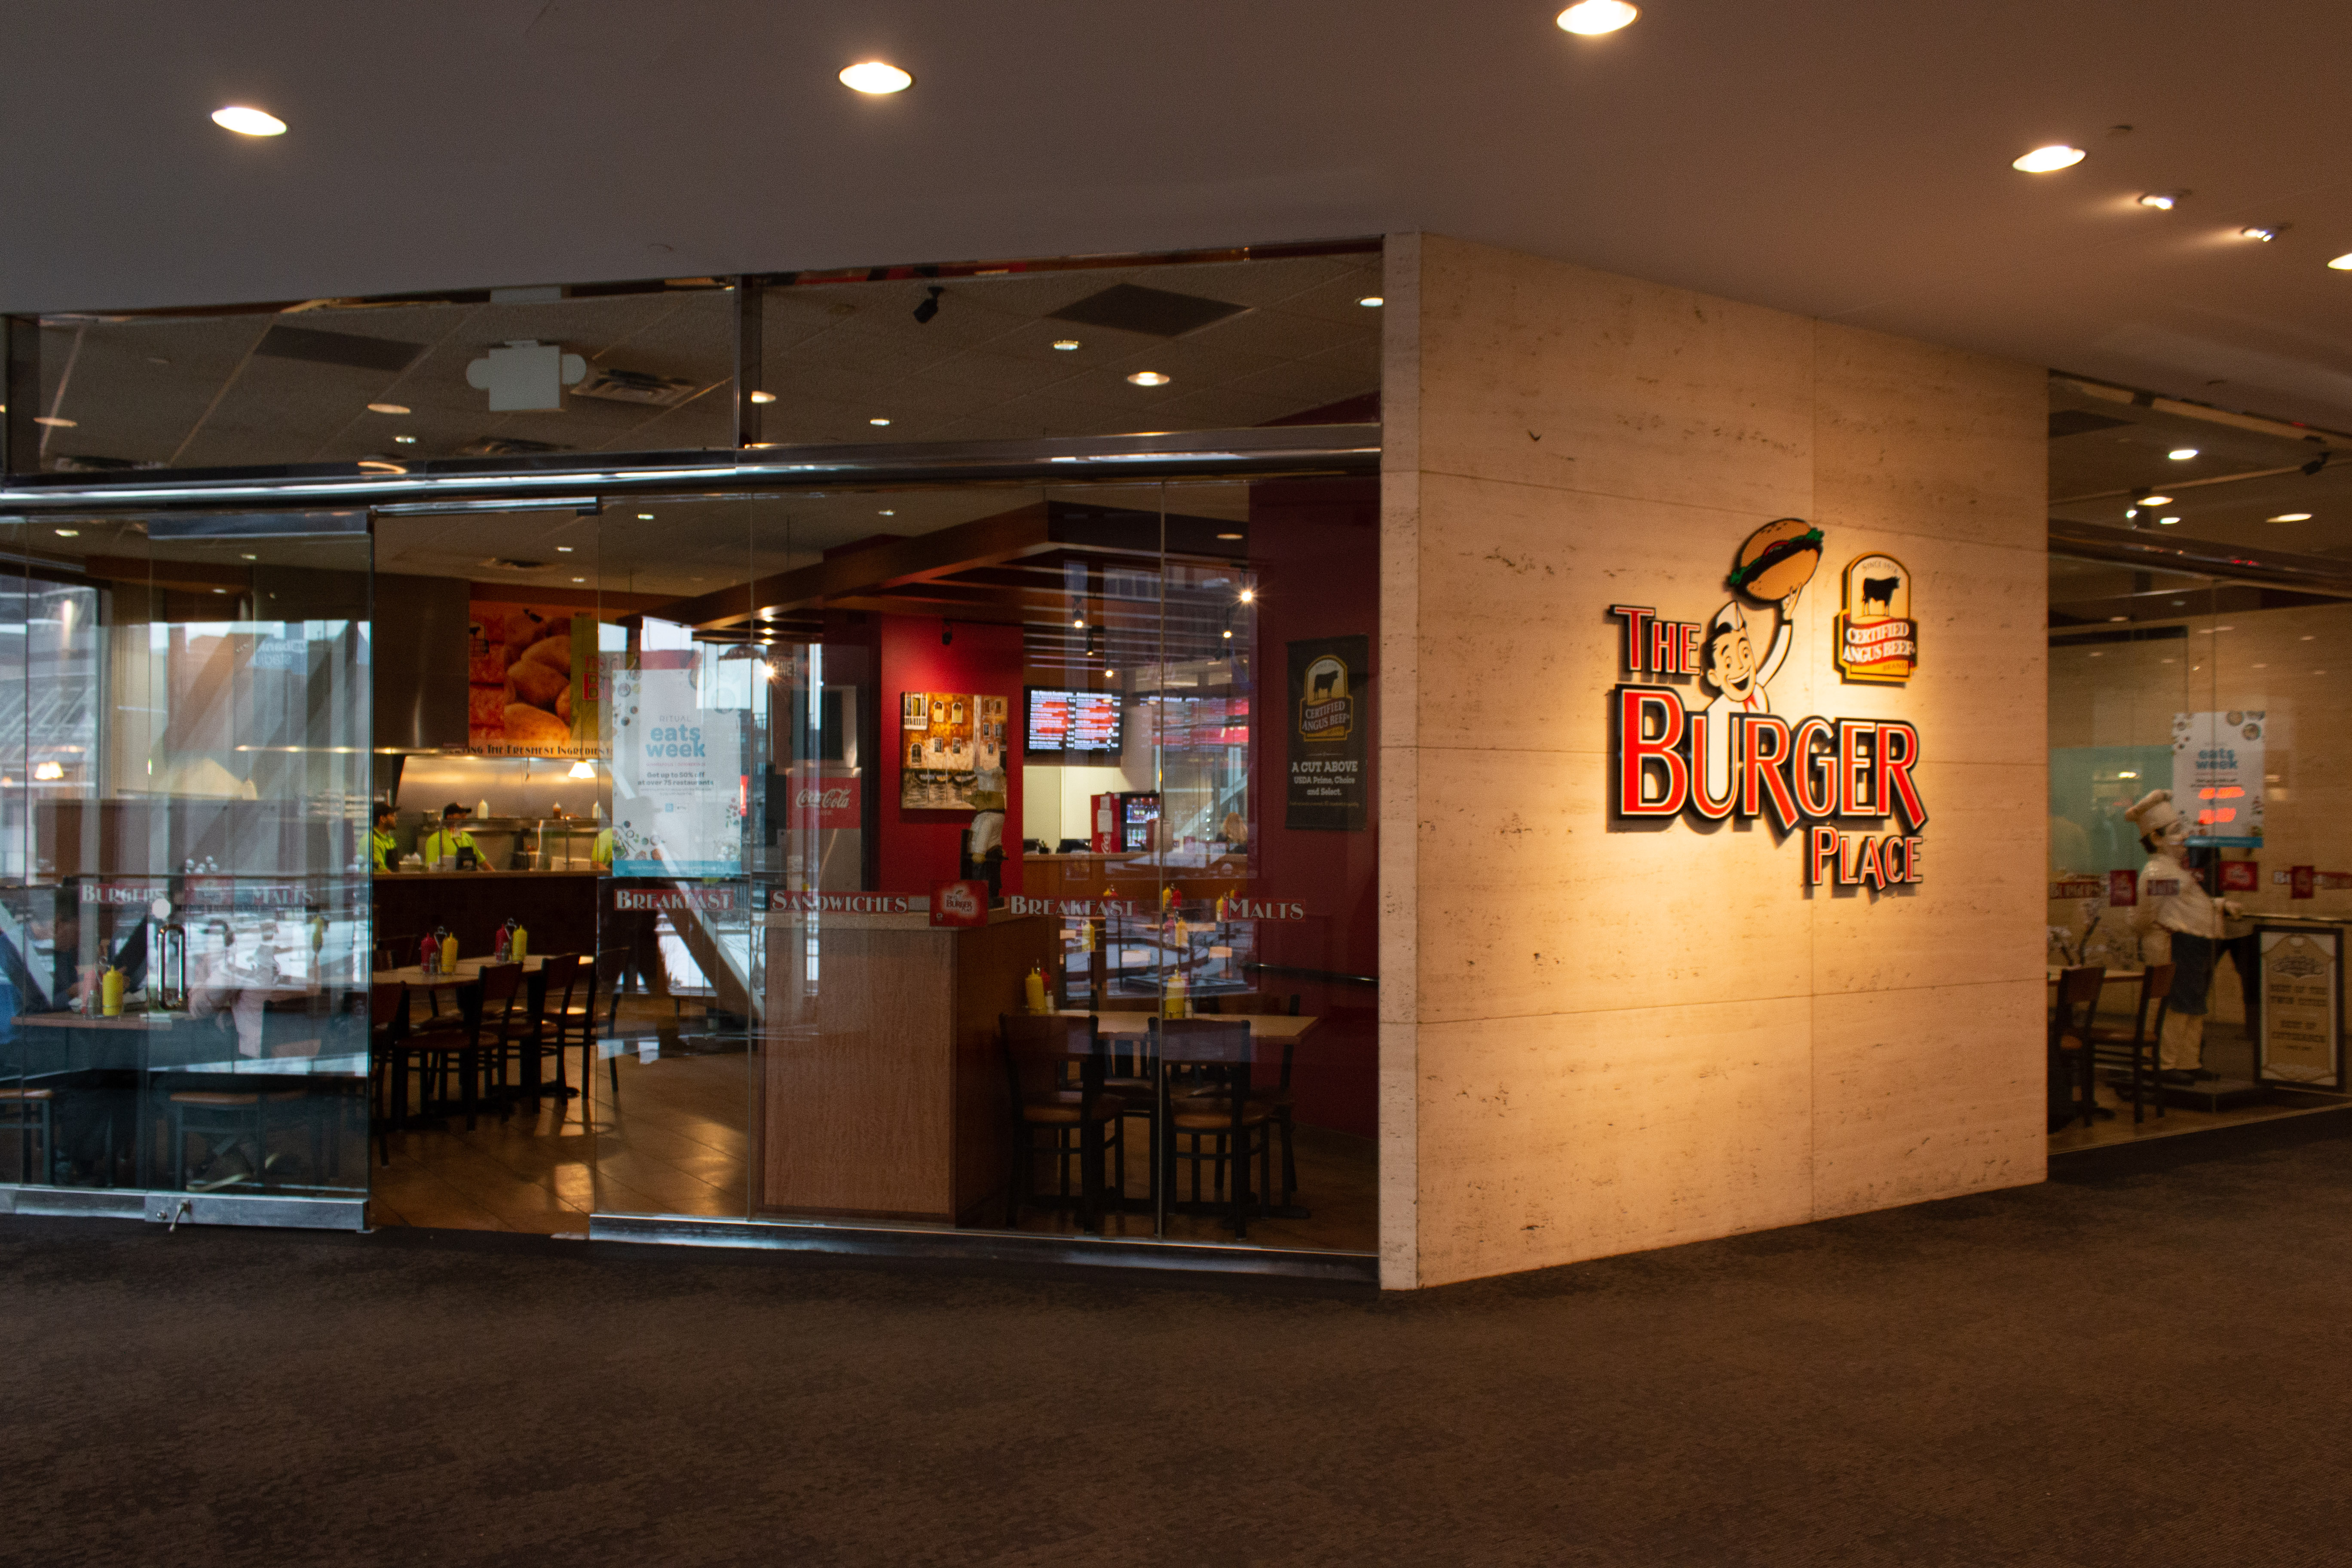 Gallery – The Burger Place